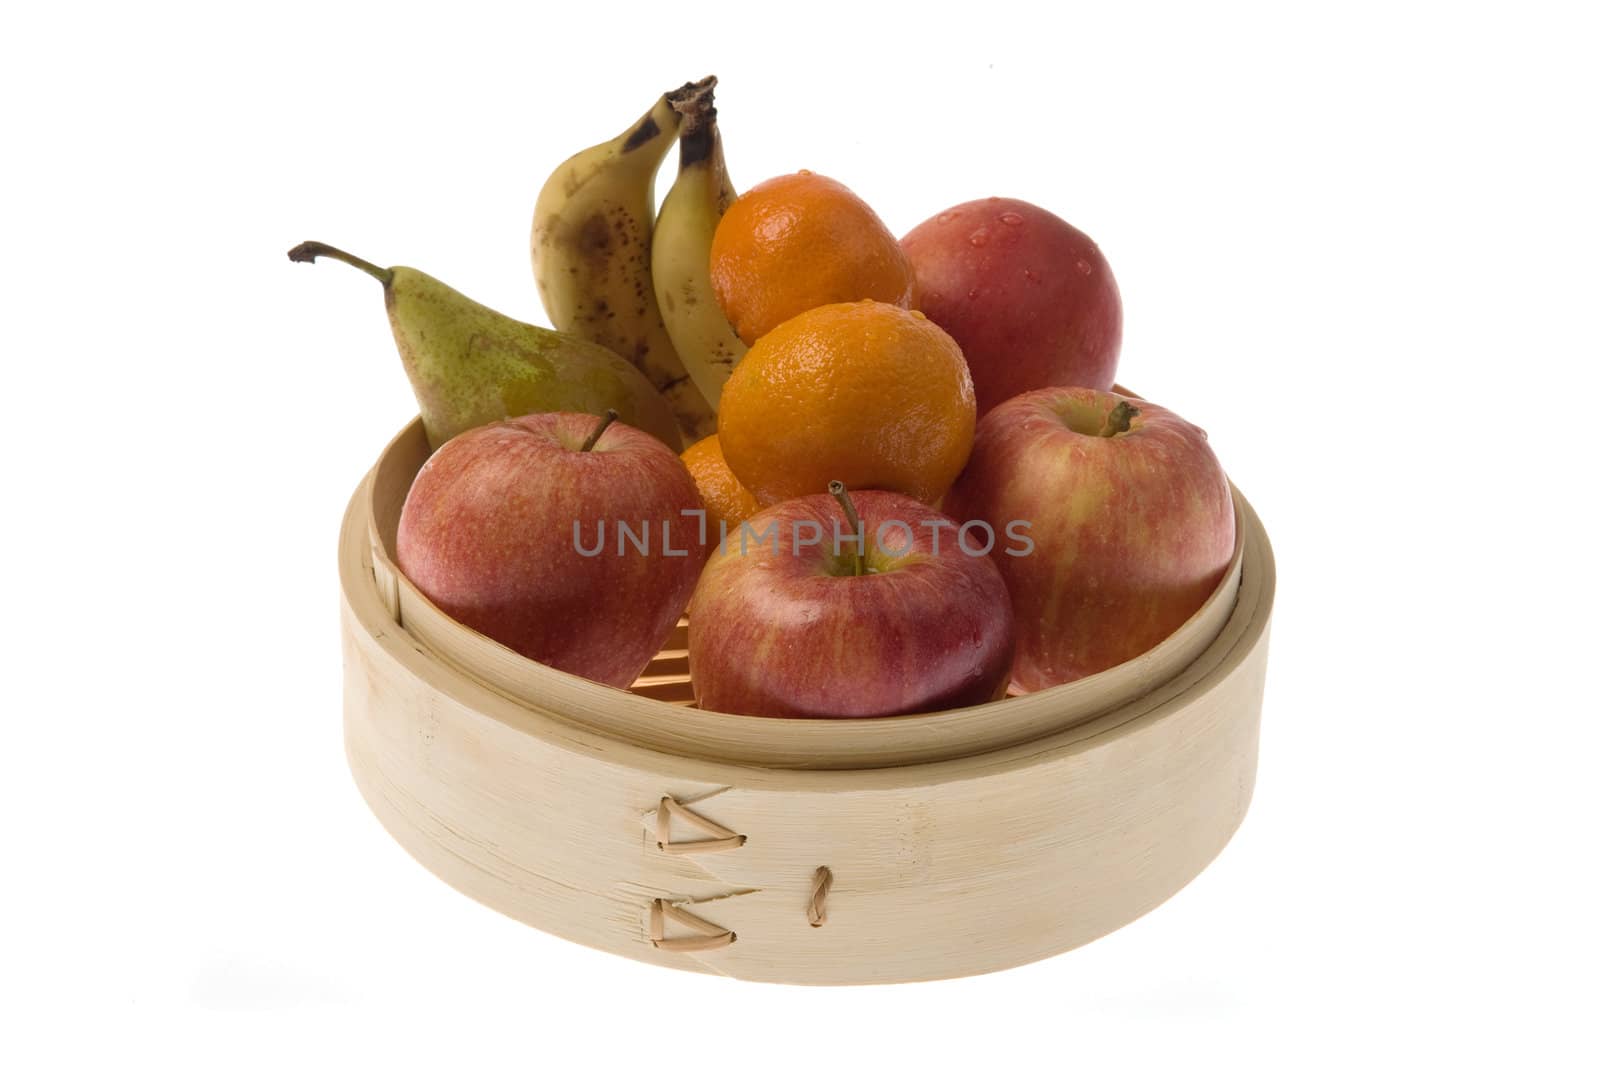 Bamboo steamer with apples, pears, tangerines and bananas,.